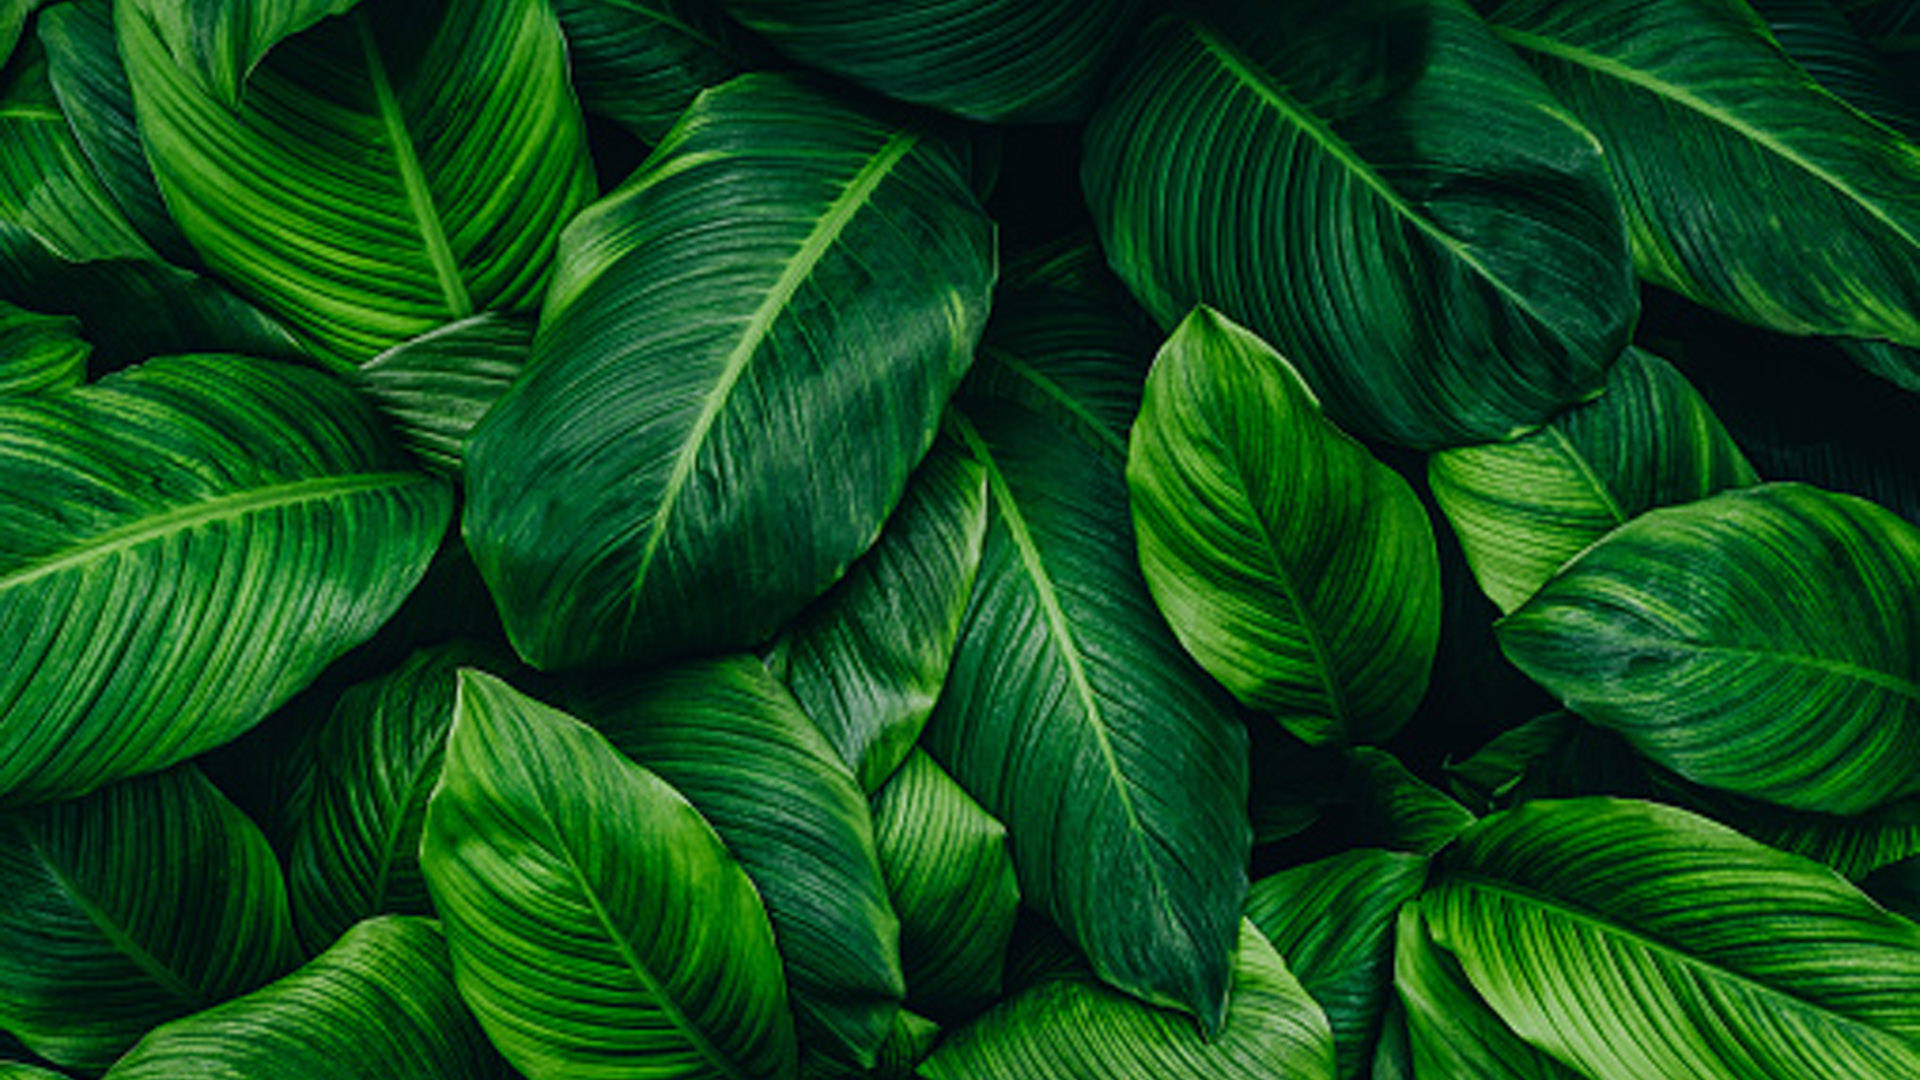 Textured Peace Lily Leaves Green Plants Background